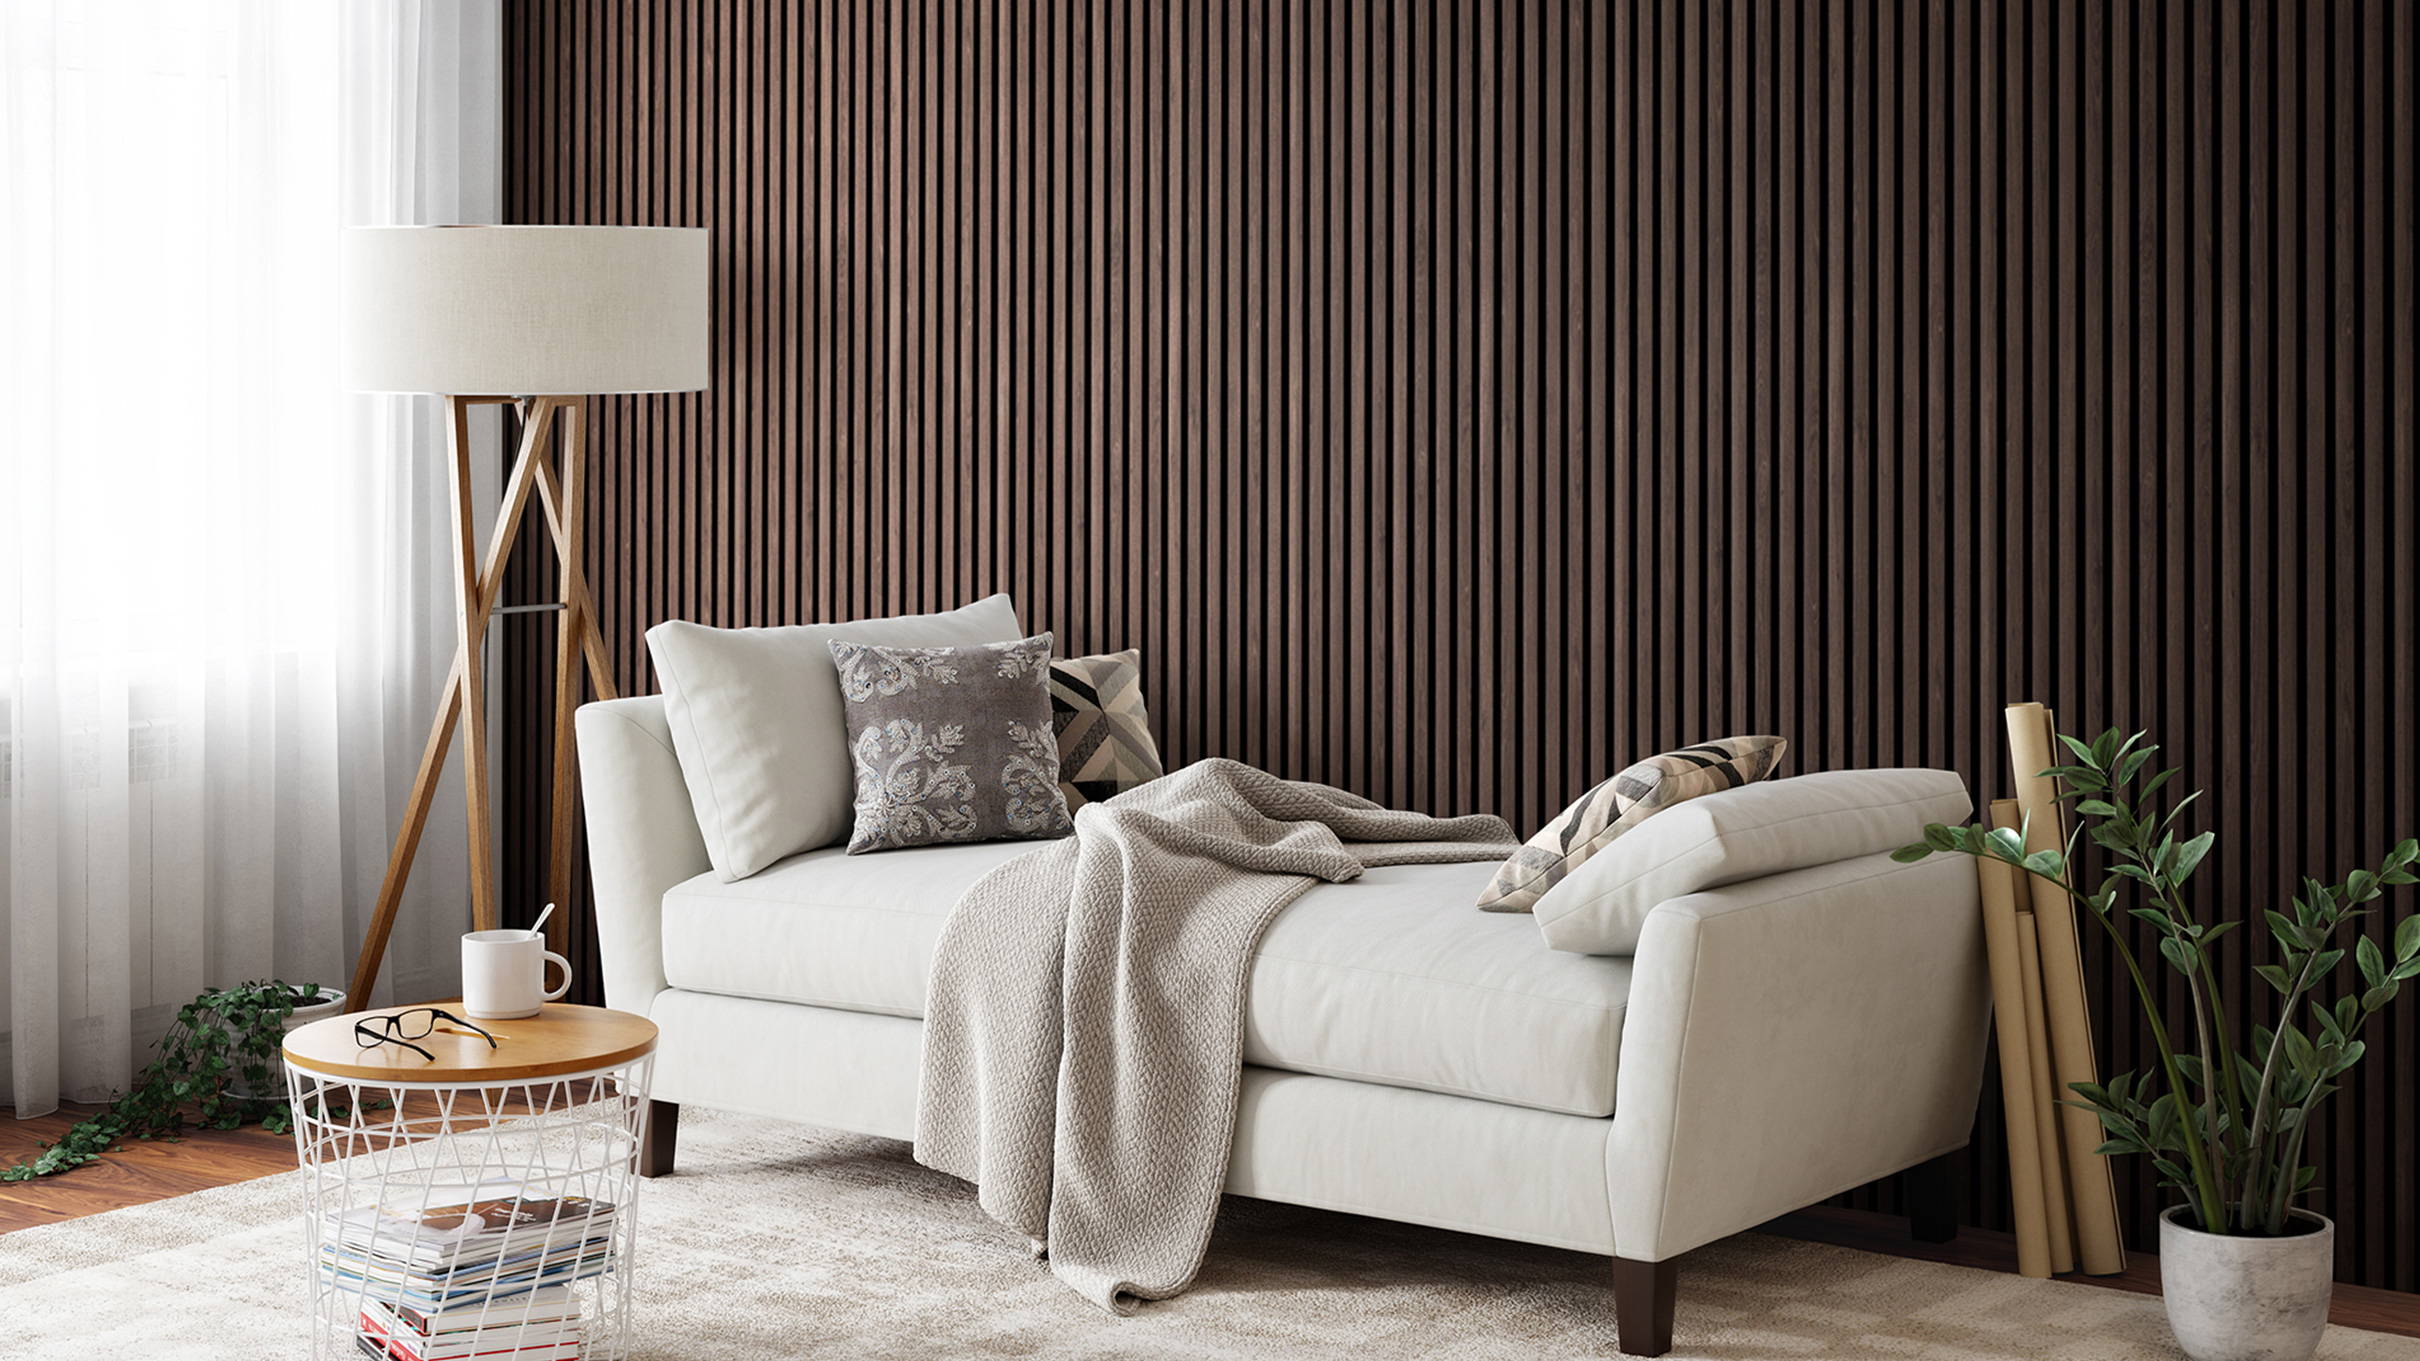 A modern interior featuring acoustic slat wood wall panels. A contemporary interior design solution.